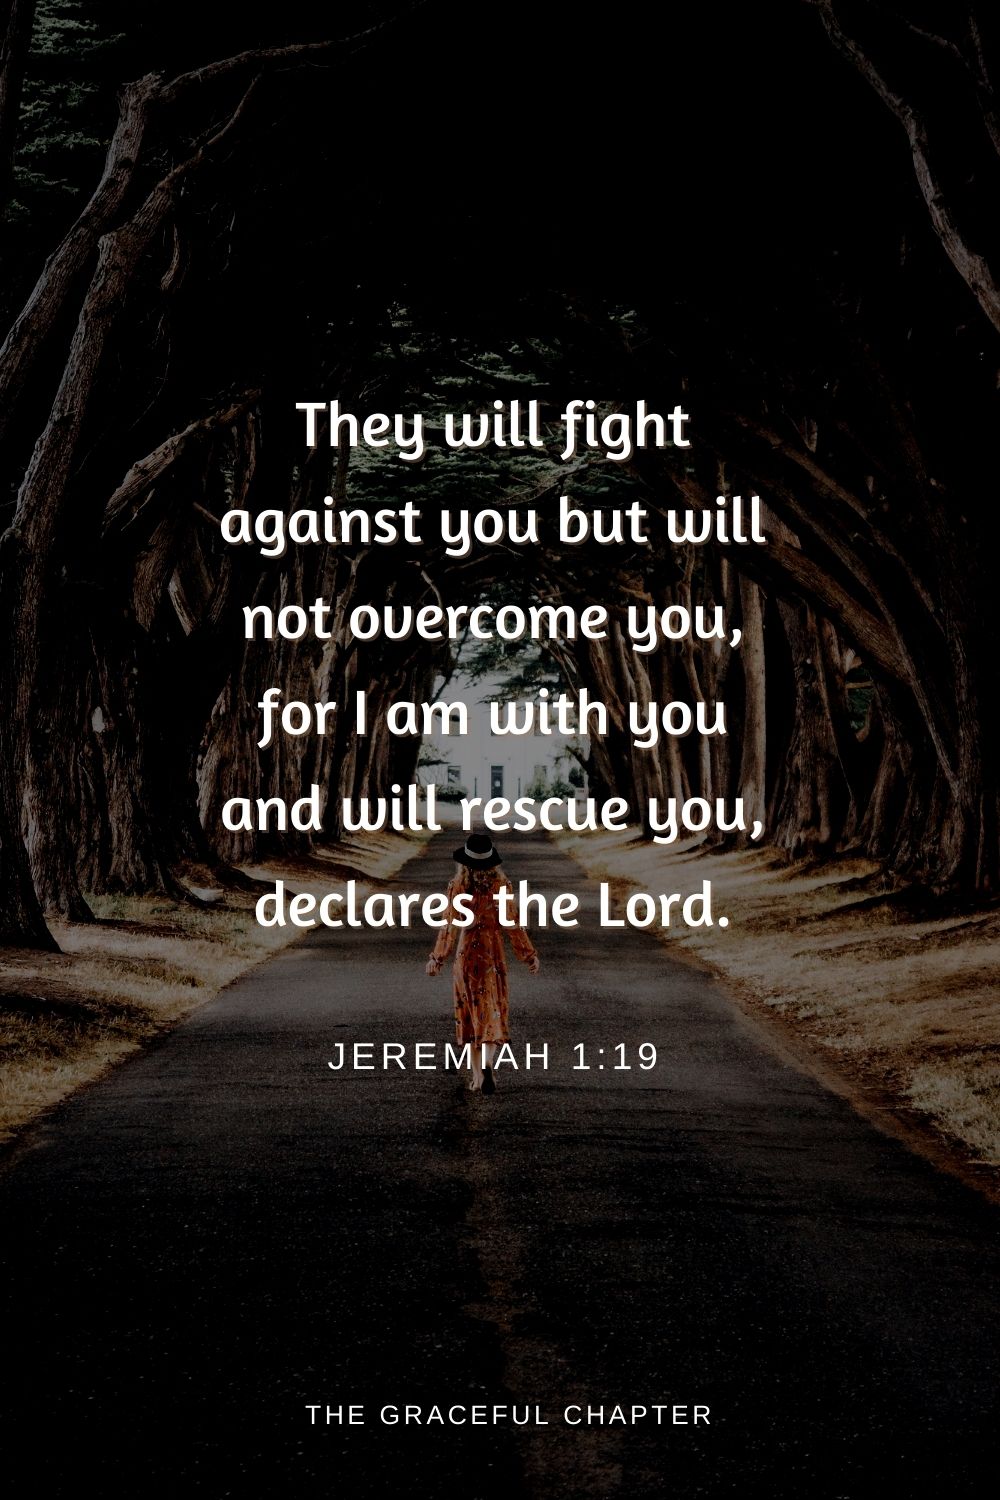 They will fight against you but will not overcome you, for I am with you and will rescue you, declares the Lord.